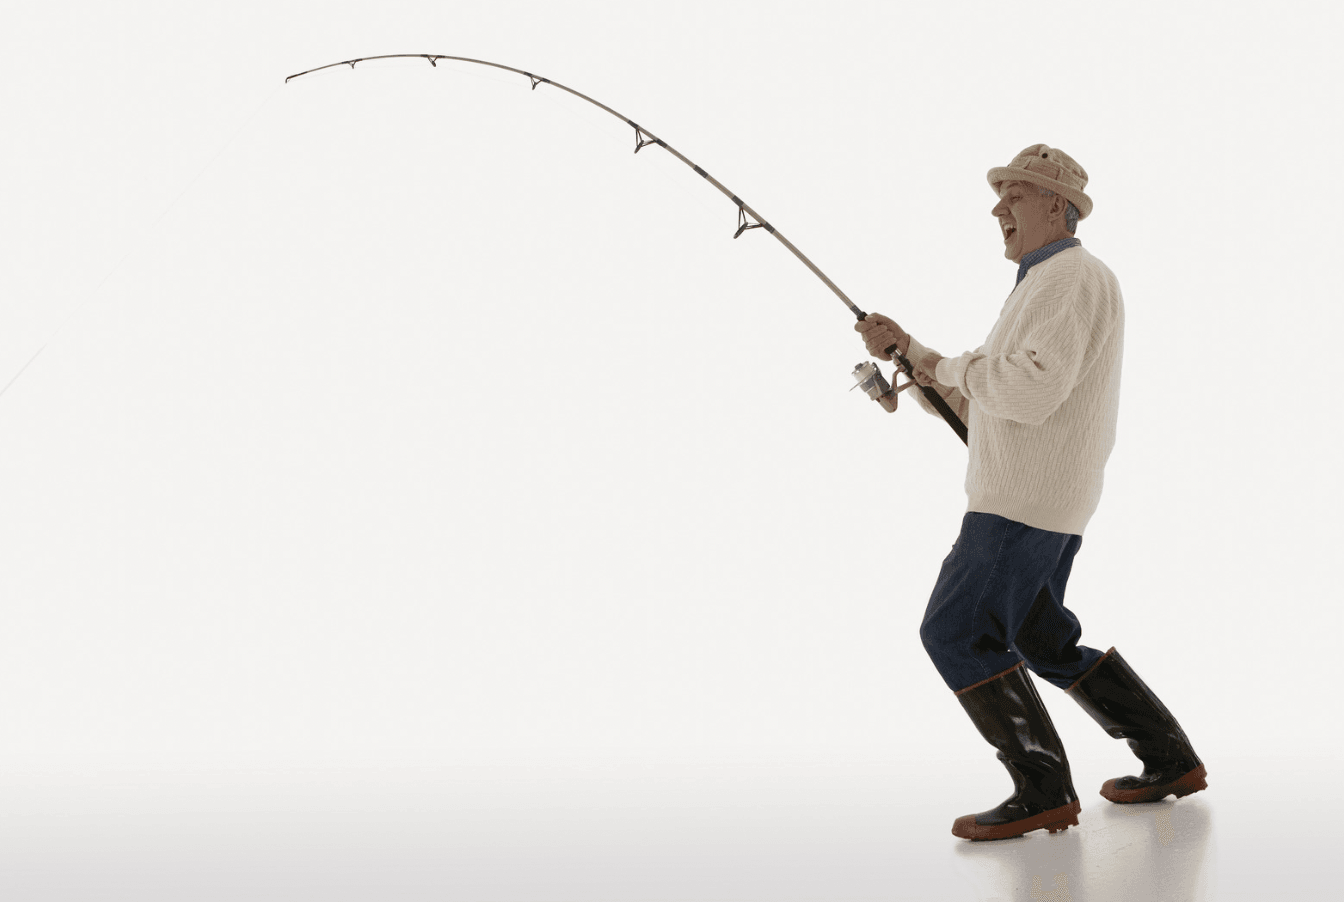 Fishing as Therapy - ABILITY Magazine